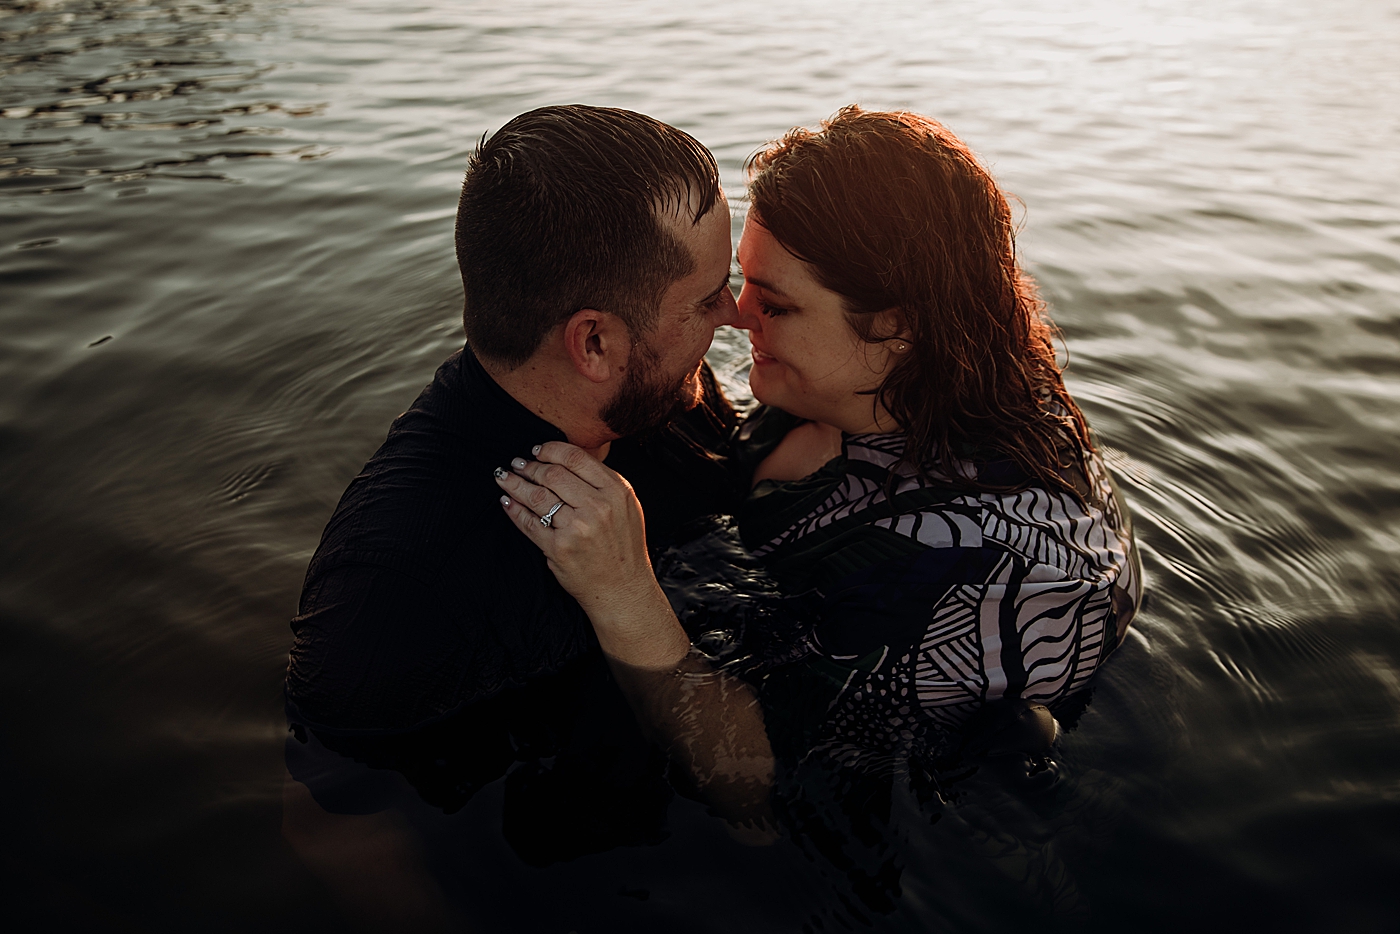 Couple nuzzling and holding each other in calm ocean water House of Refuge Engagement Photography captured by Maggie Alvarez Photography